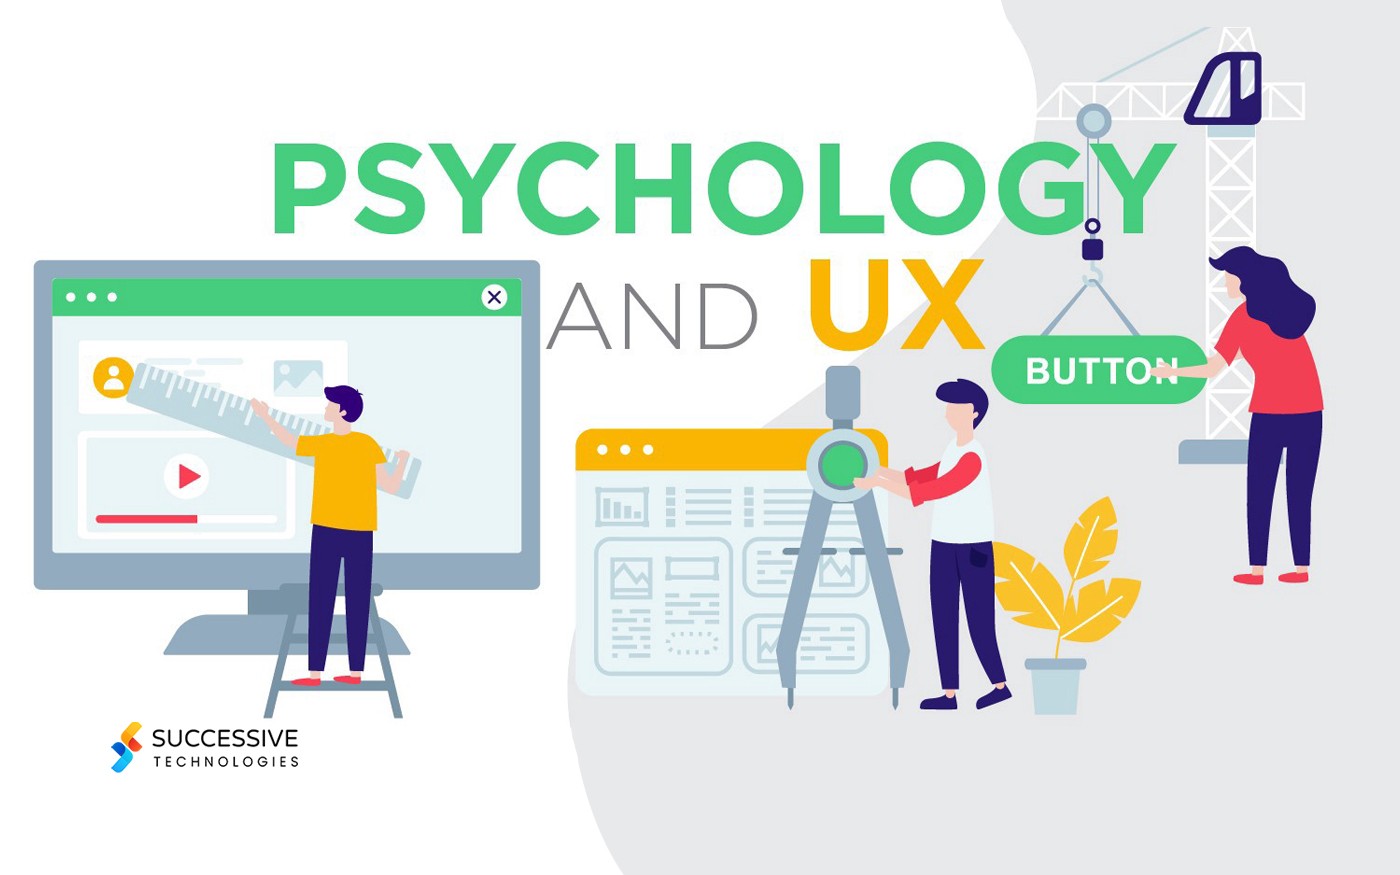 Psychology and UX